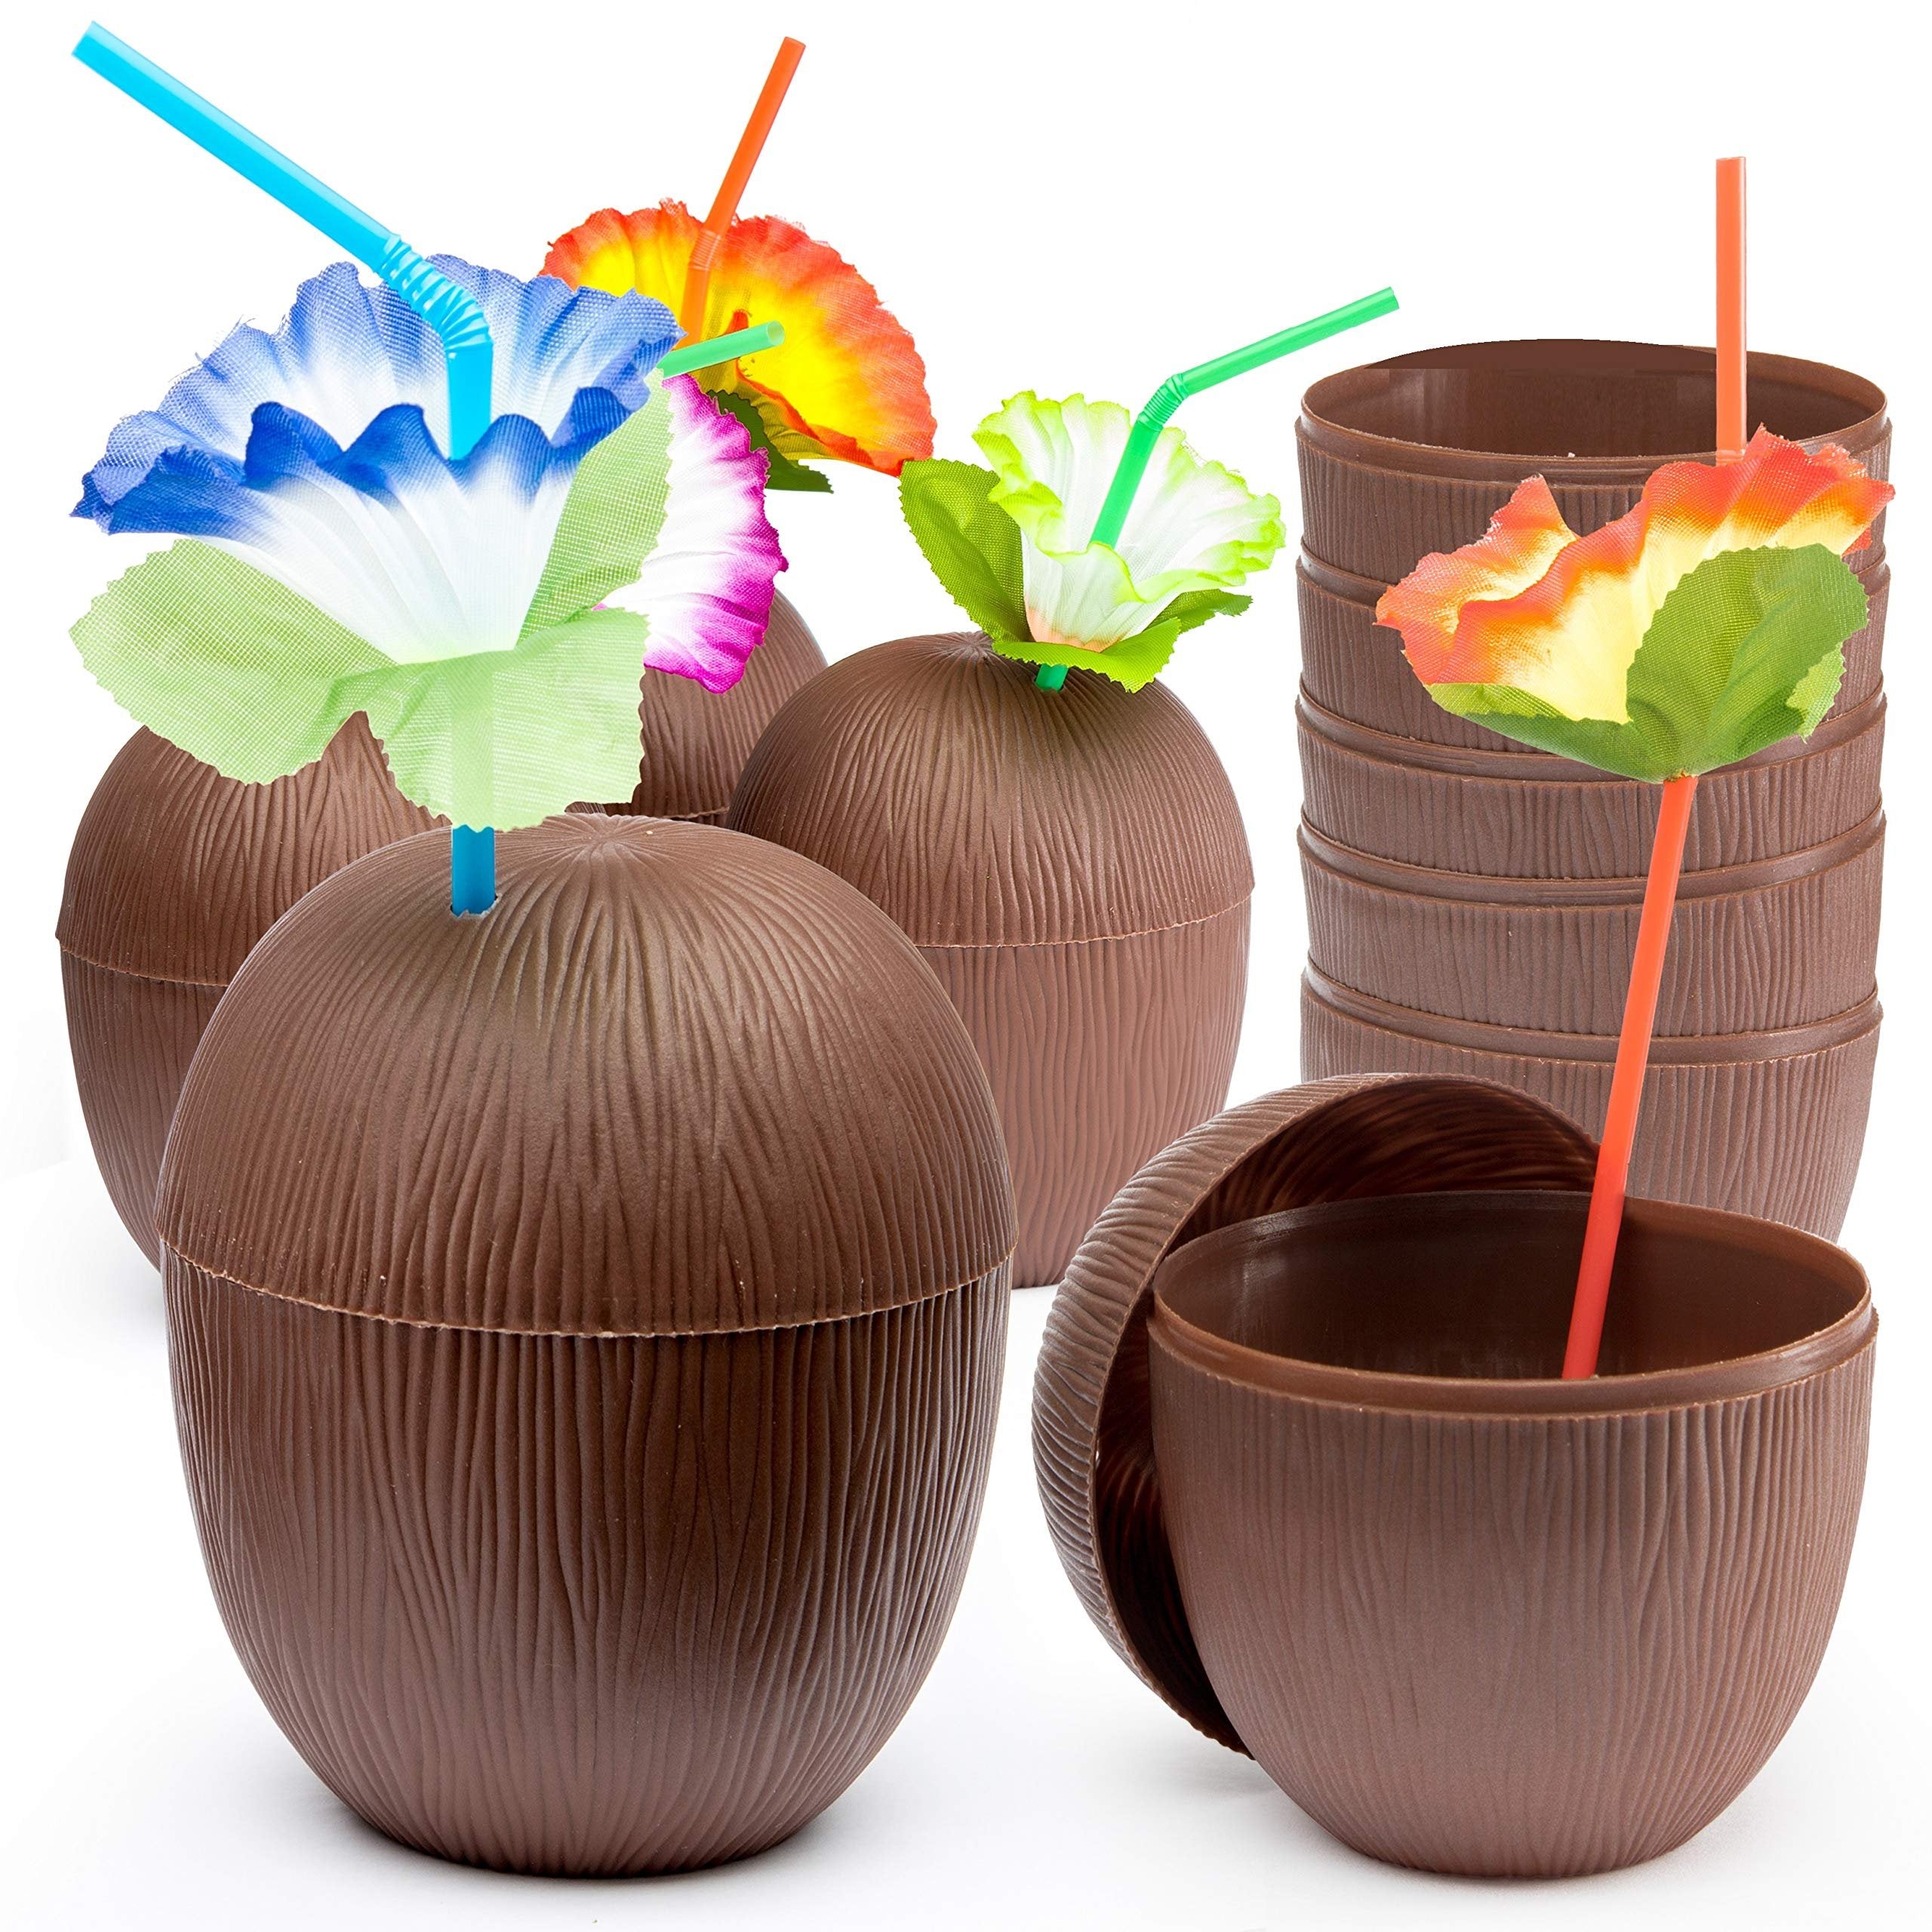 PREXTEX Coconut Cups with Flower Straws & Twist Close Lids (18 Pack) for Luau Party Decorations, Pool Parties, Moana Birthday Parties, Tropical Tiki Parties, Summer, Hawaiian Themed Party Decorations